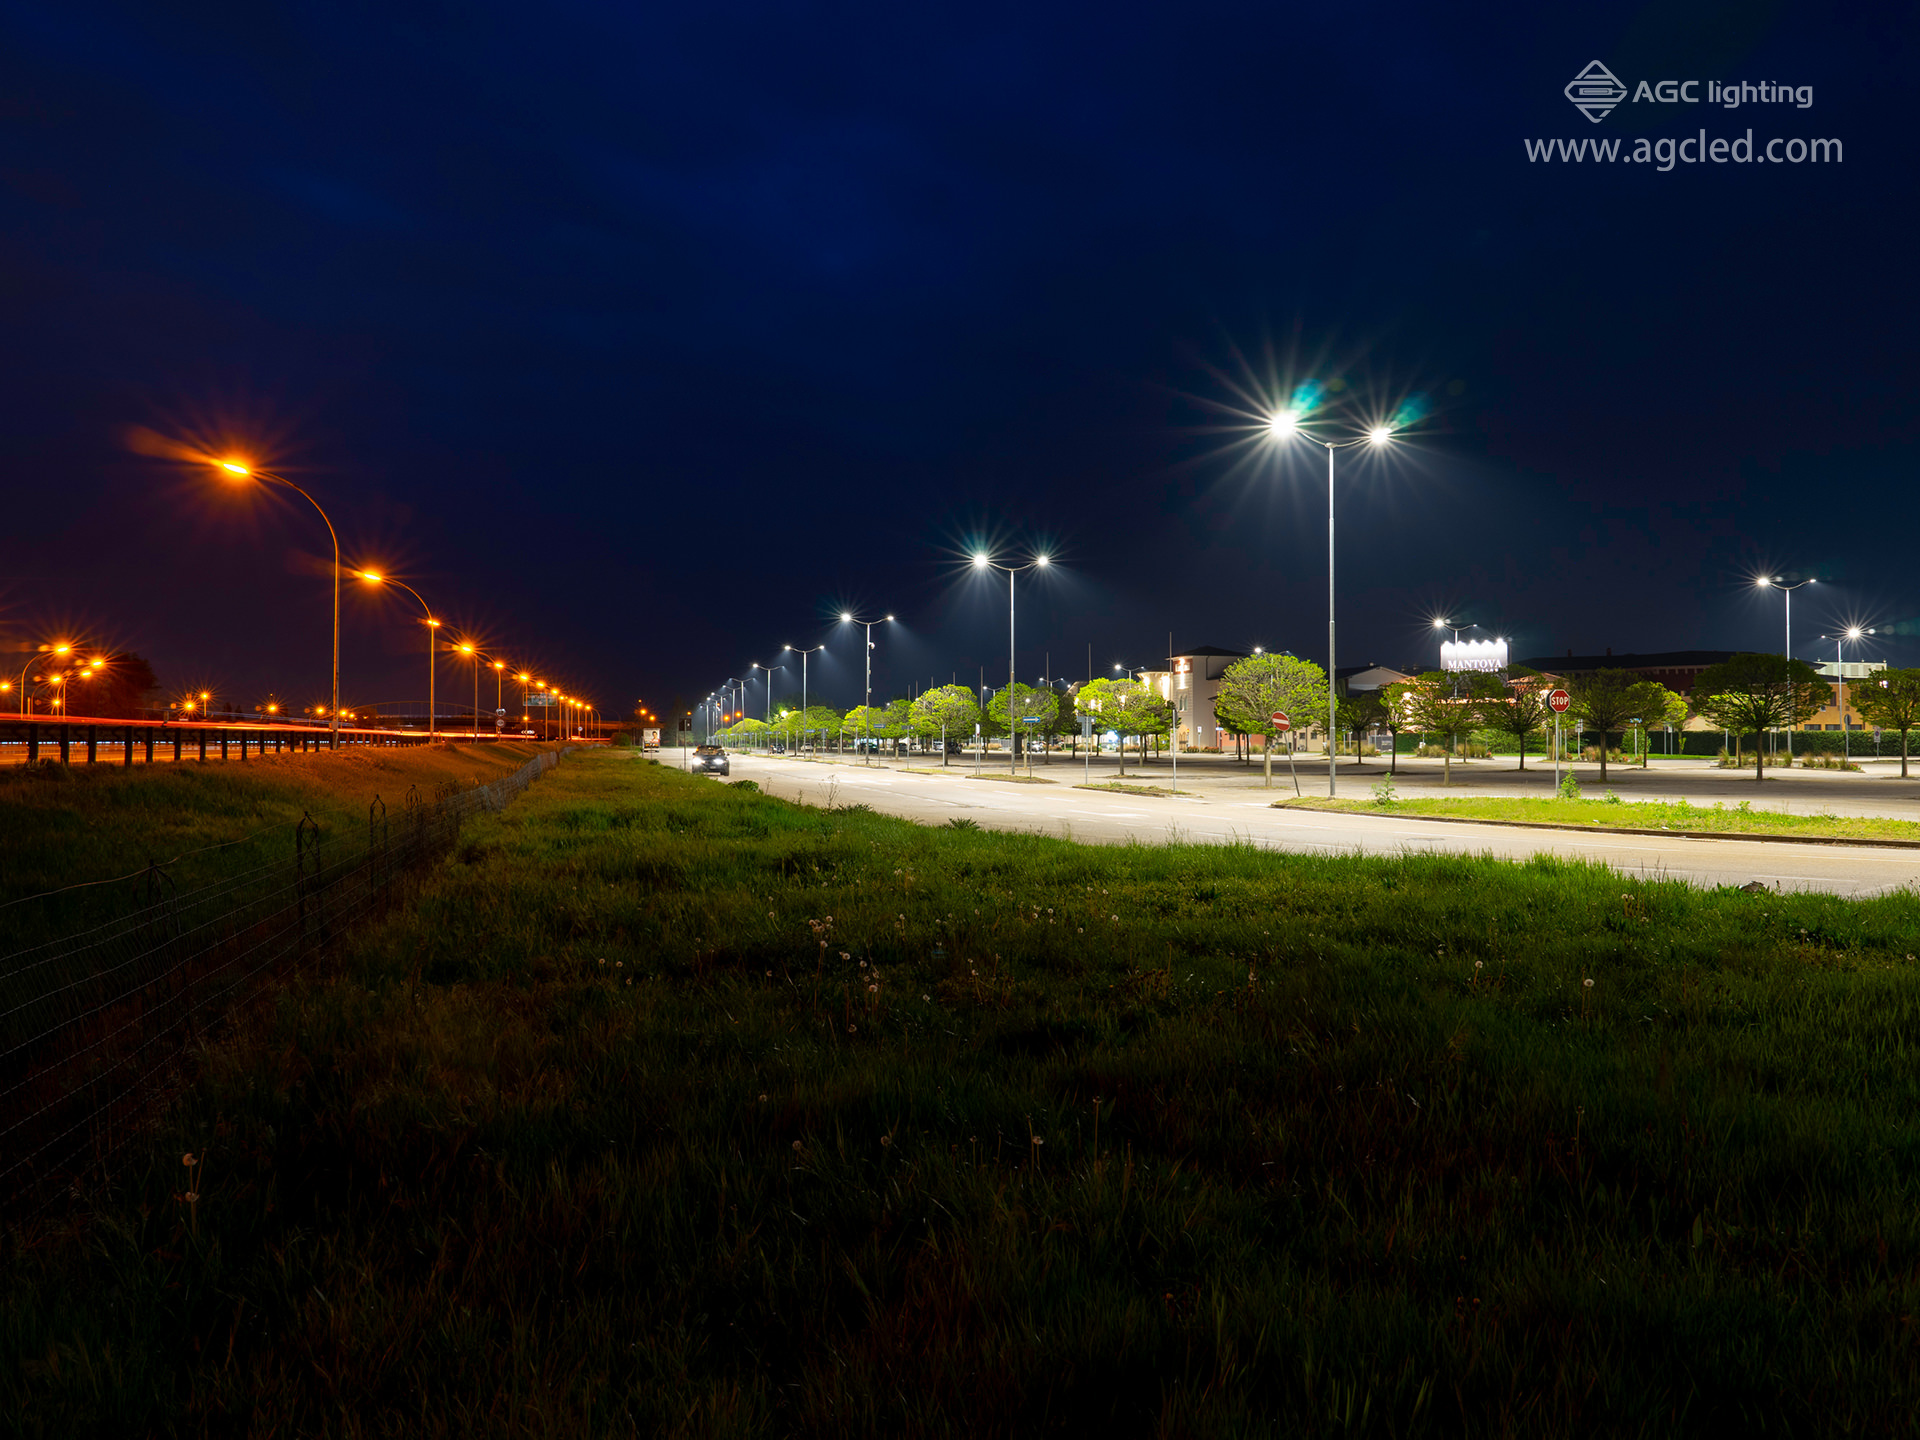 150w led street light vs conventional light in outlet parking lot